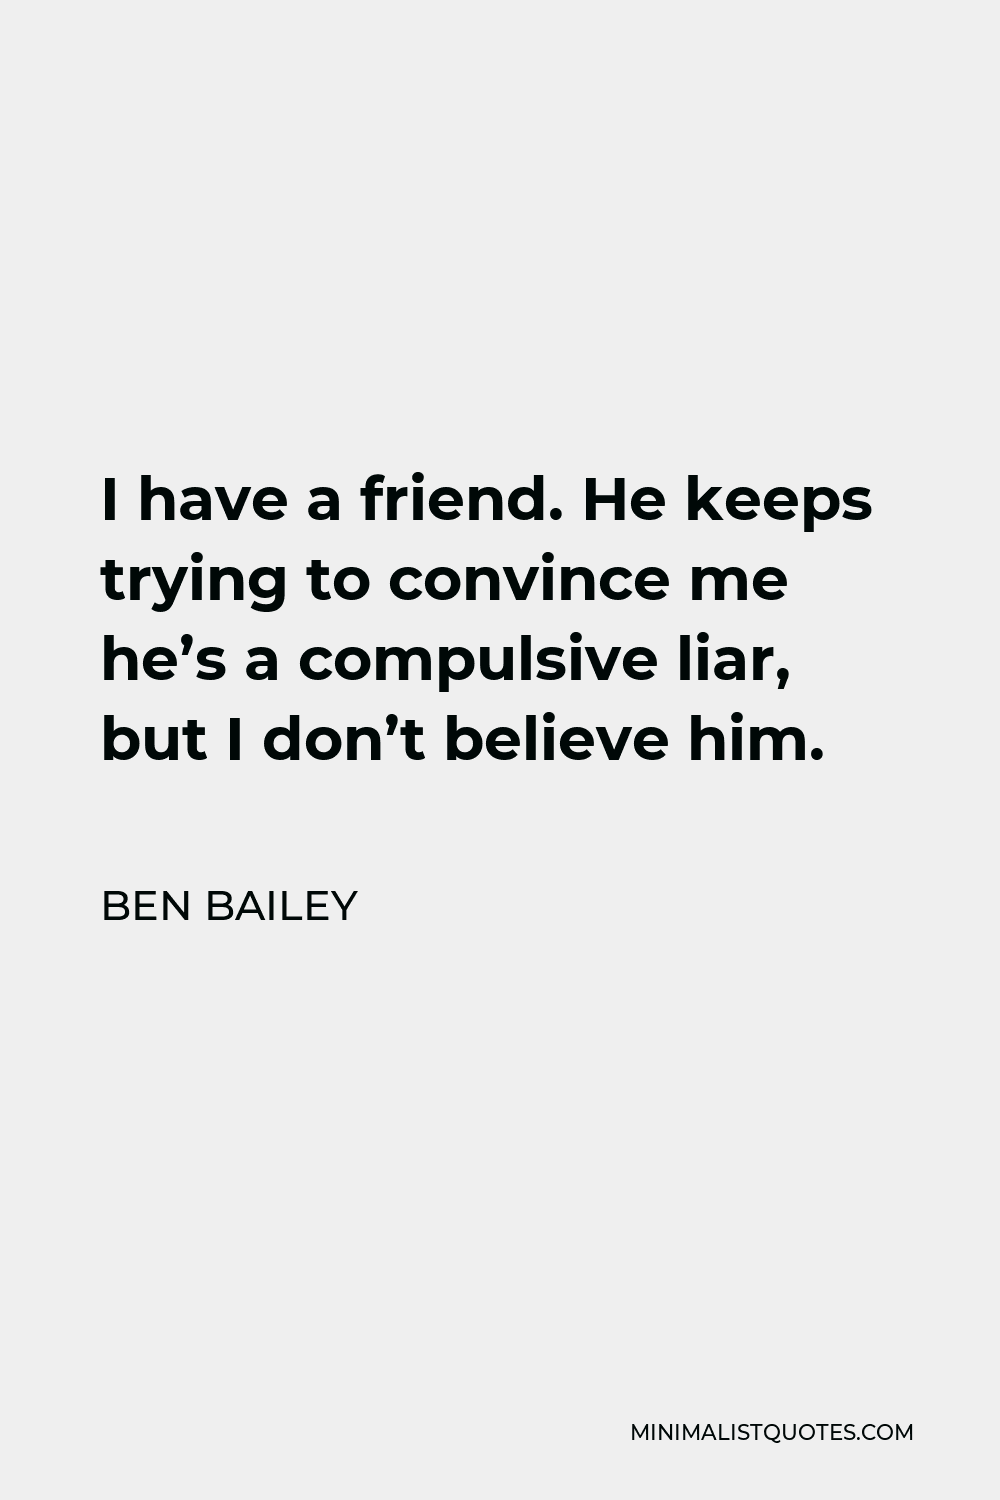 Ben Bailey Quote - I have a friend. He keeps trying to convince me he’s a compulsive liar, but I don’t believe him.